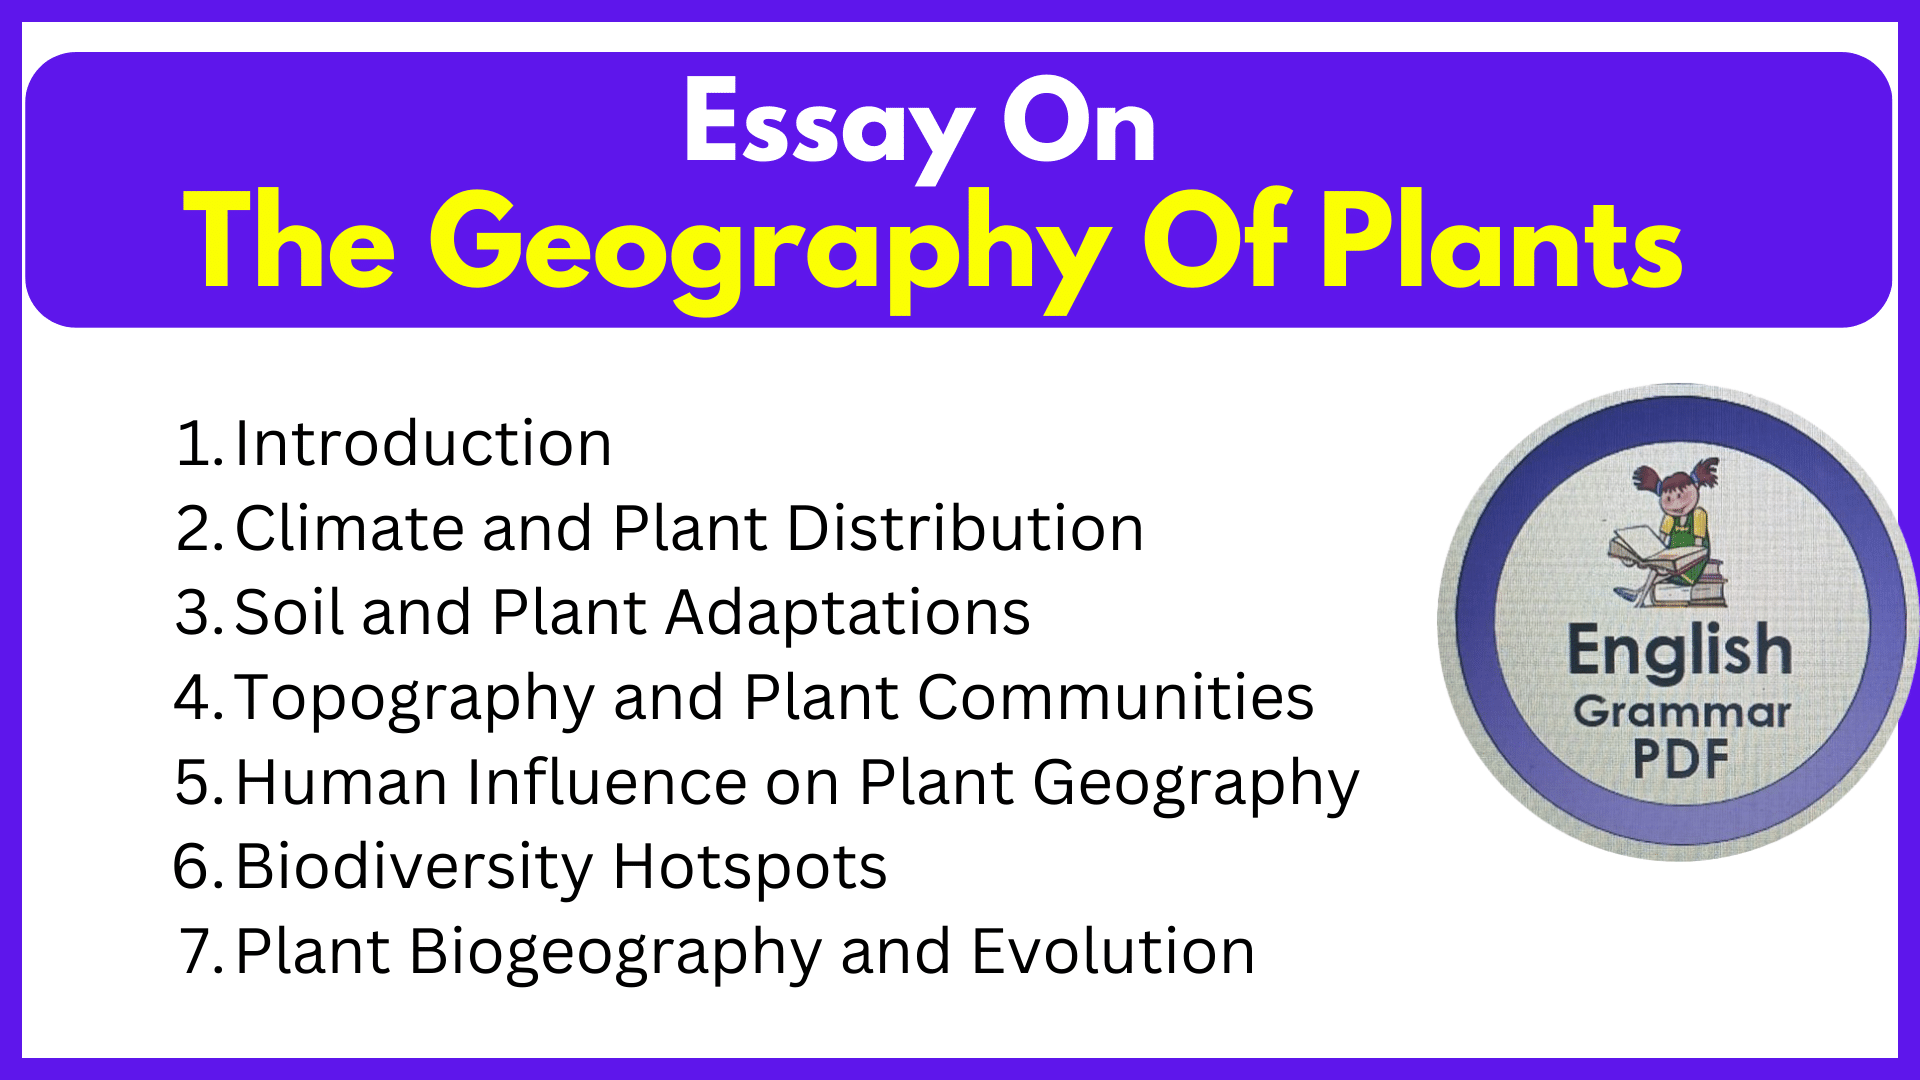 Essay On The Geography Of Plants